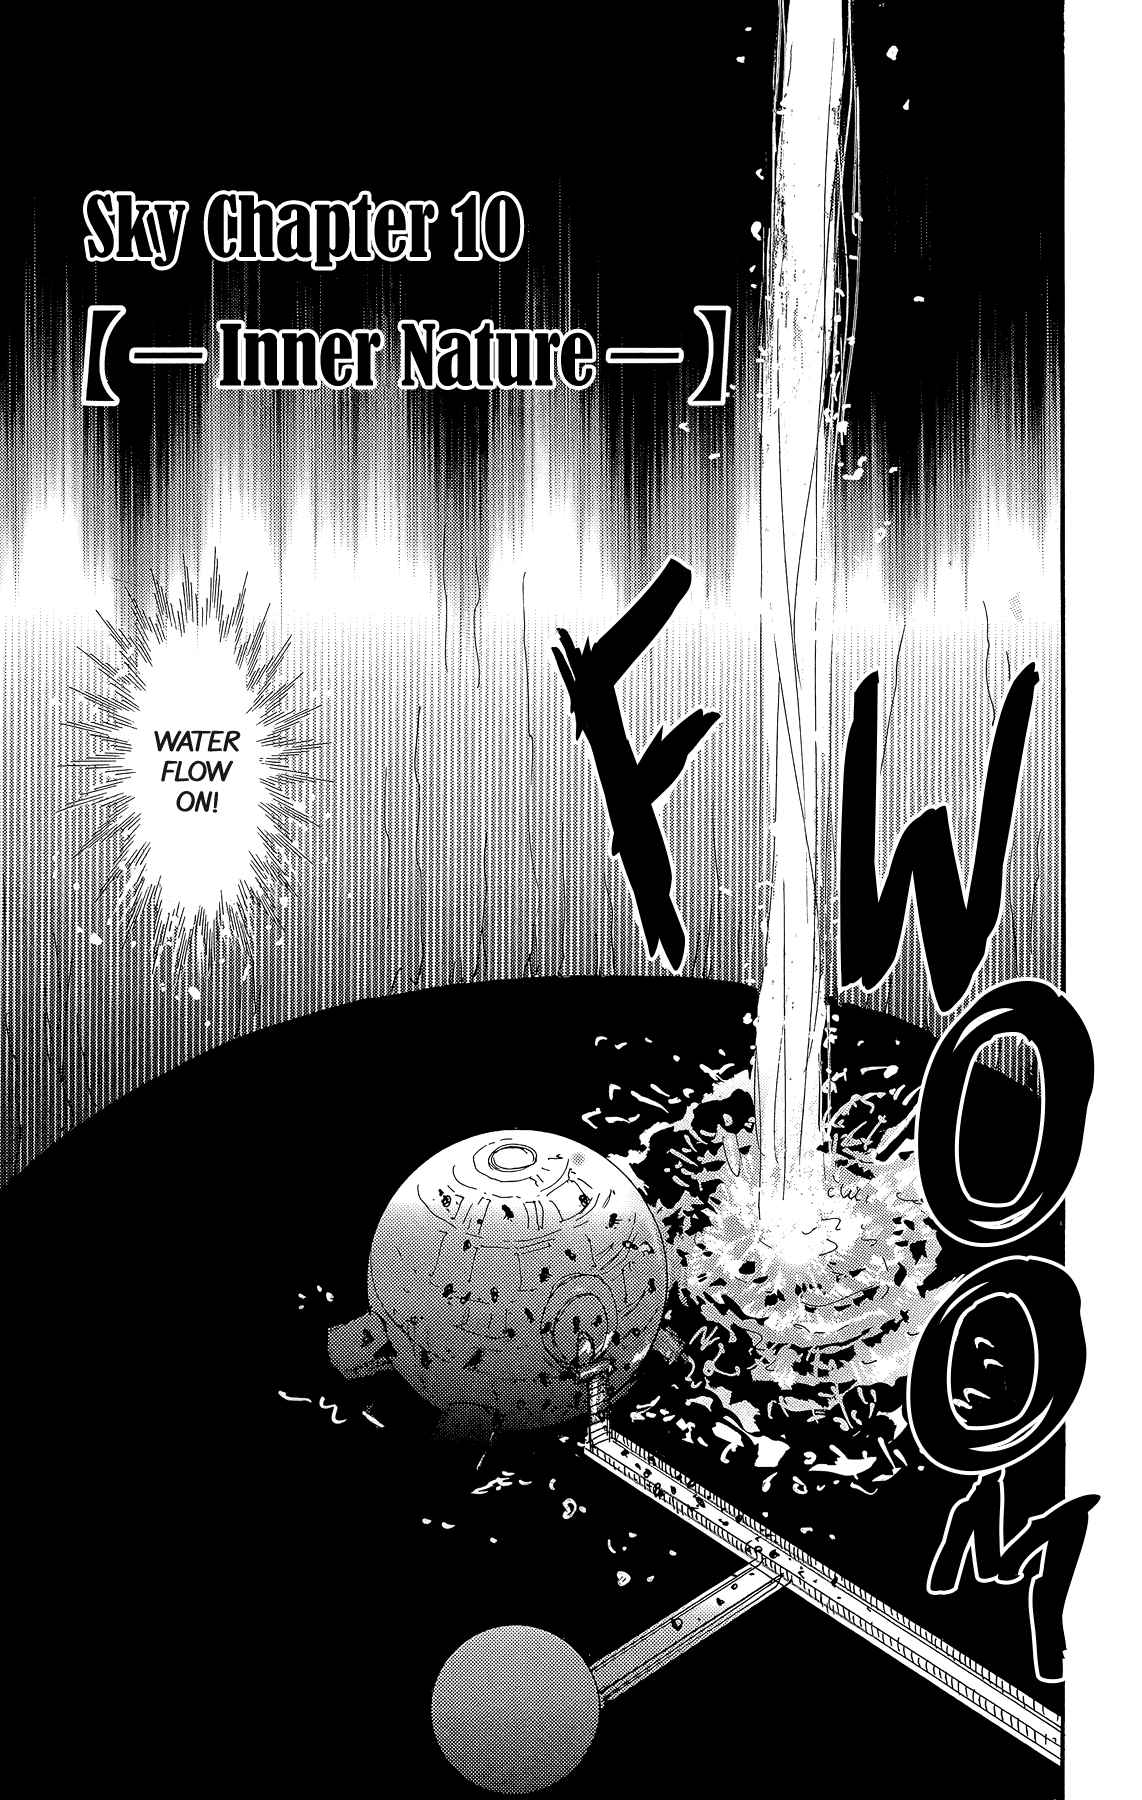 7 Seeds Vol. 34 Ch. 173 Sky Chapter 10 [Inner Nature]